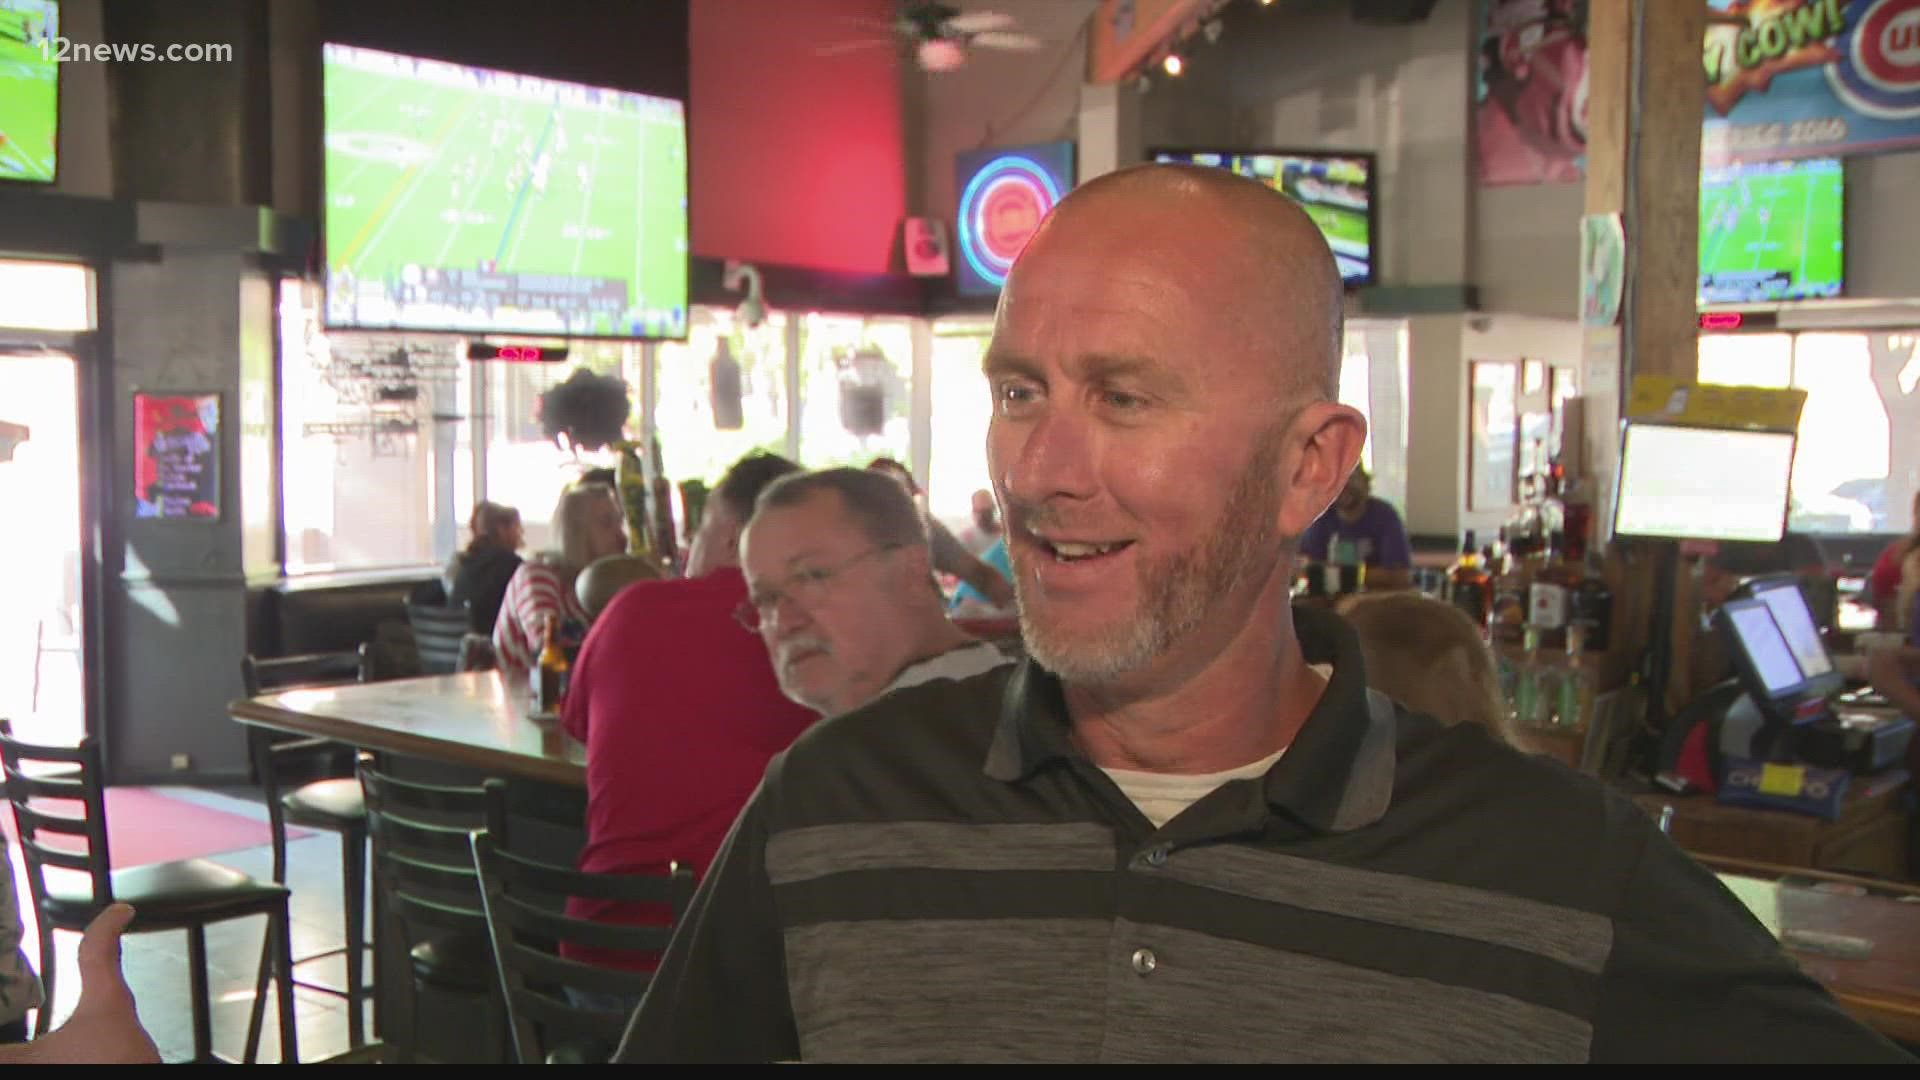 We stop by a local sports bar in the Valley to hear from Arizona Cardinals fans after the team defeats the Los Angeles Rams. Mitch Carr has more.